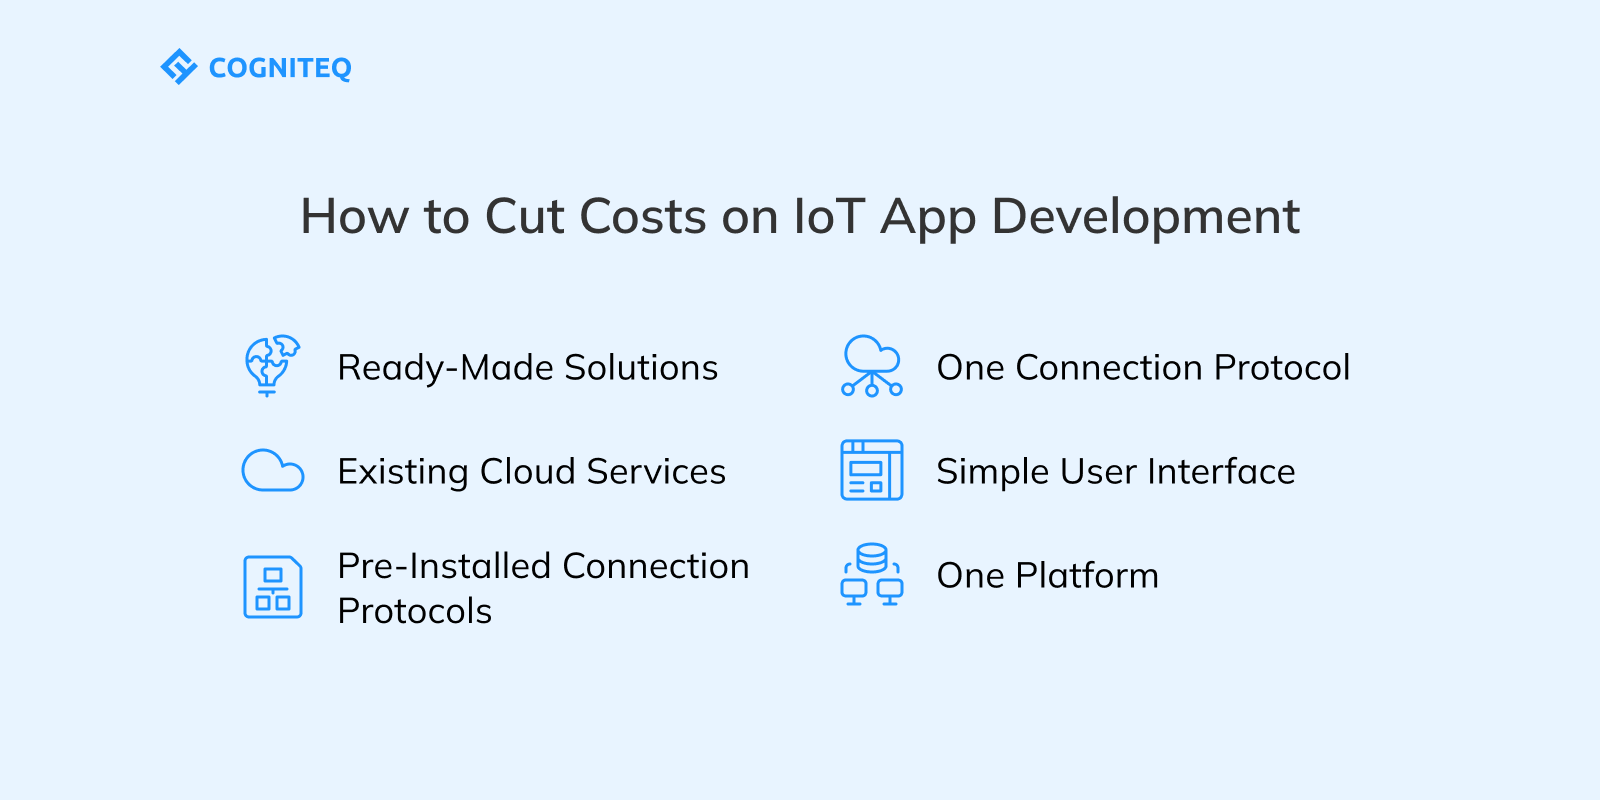 How to Cut Costs on IoT App Development